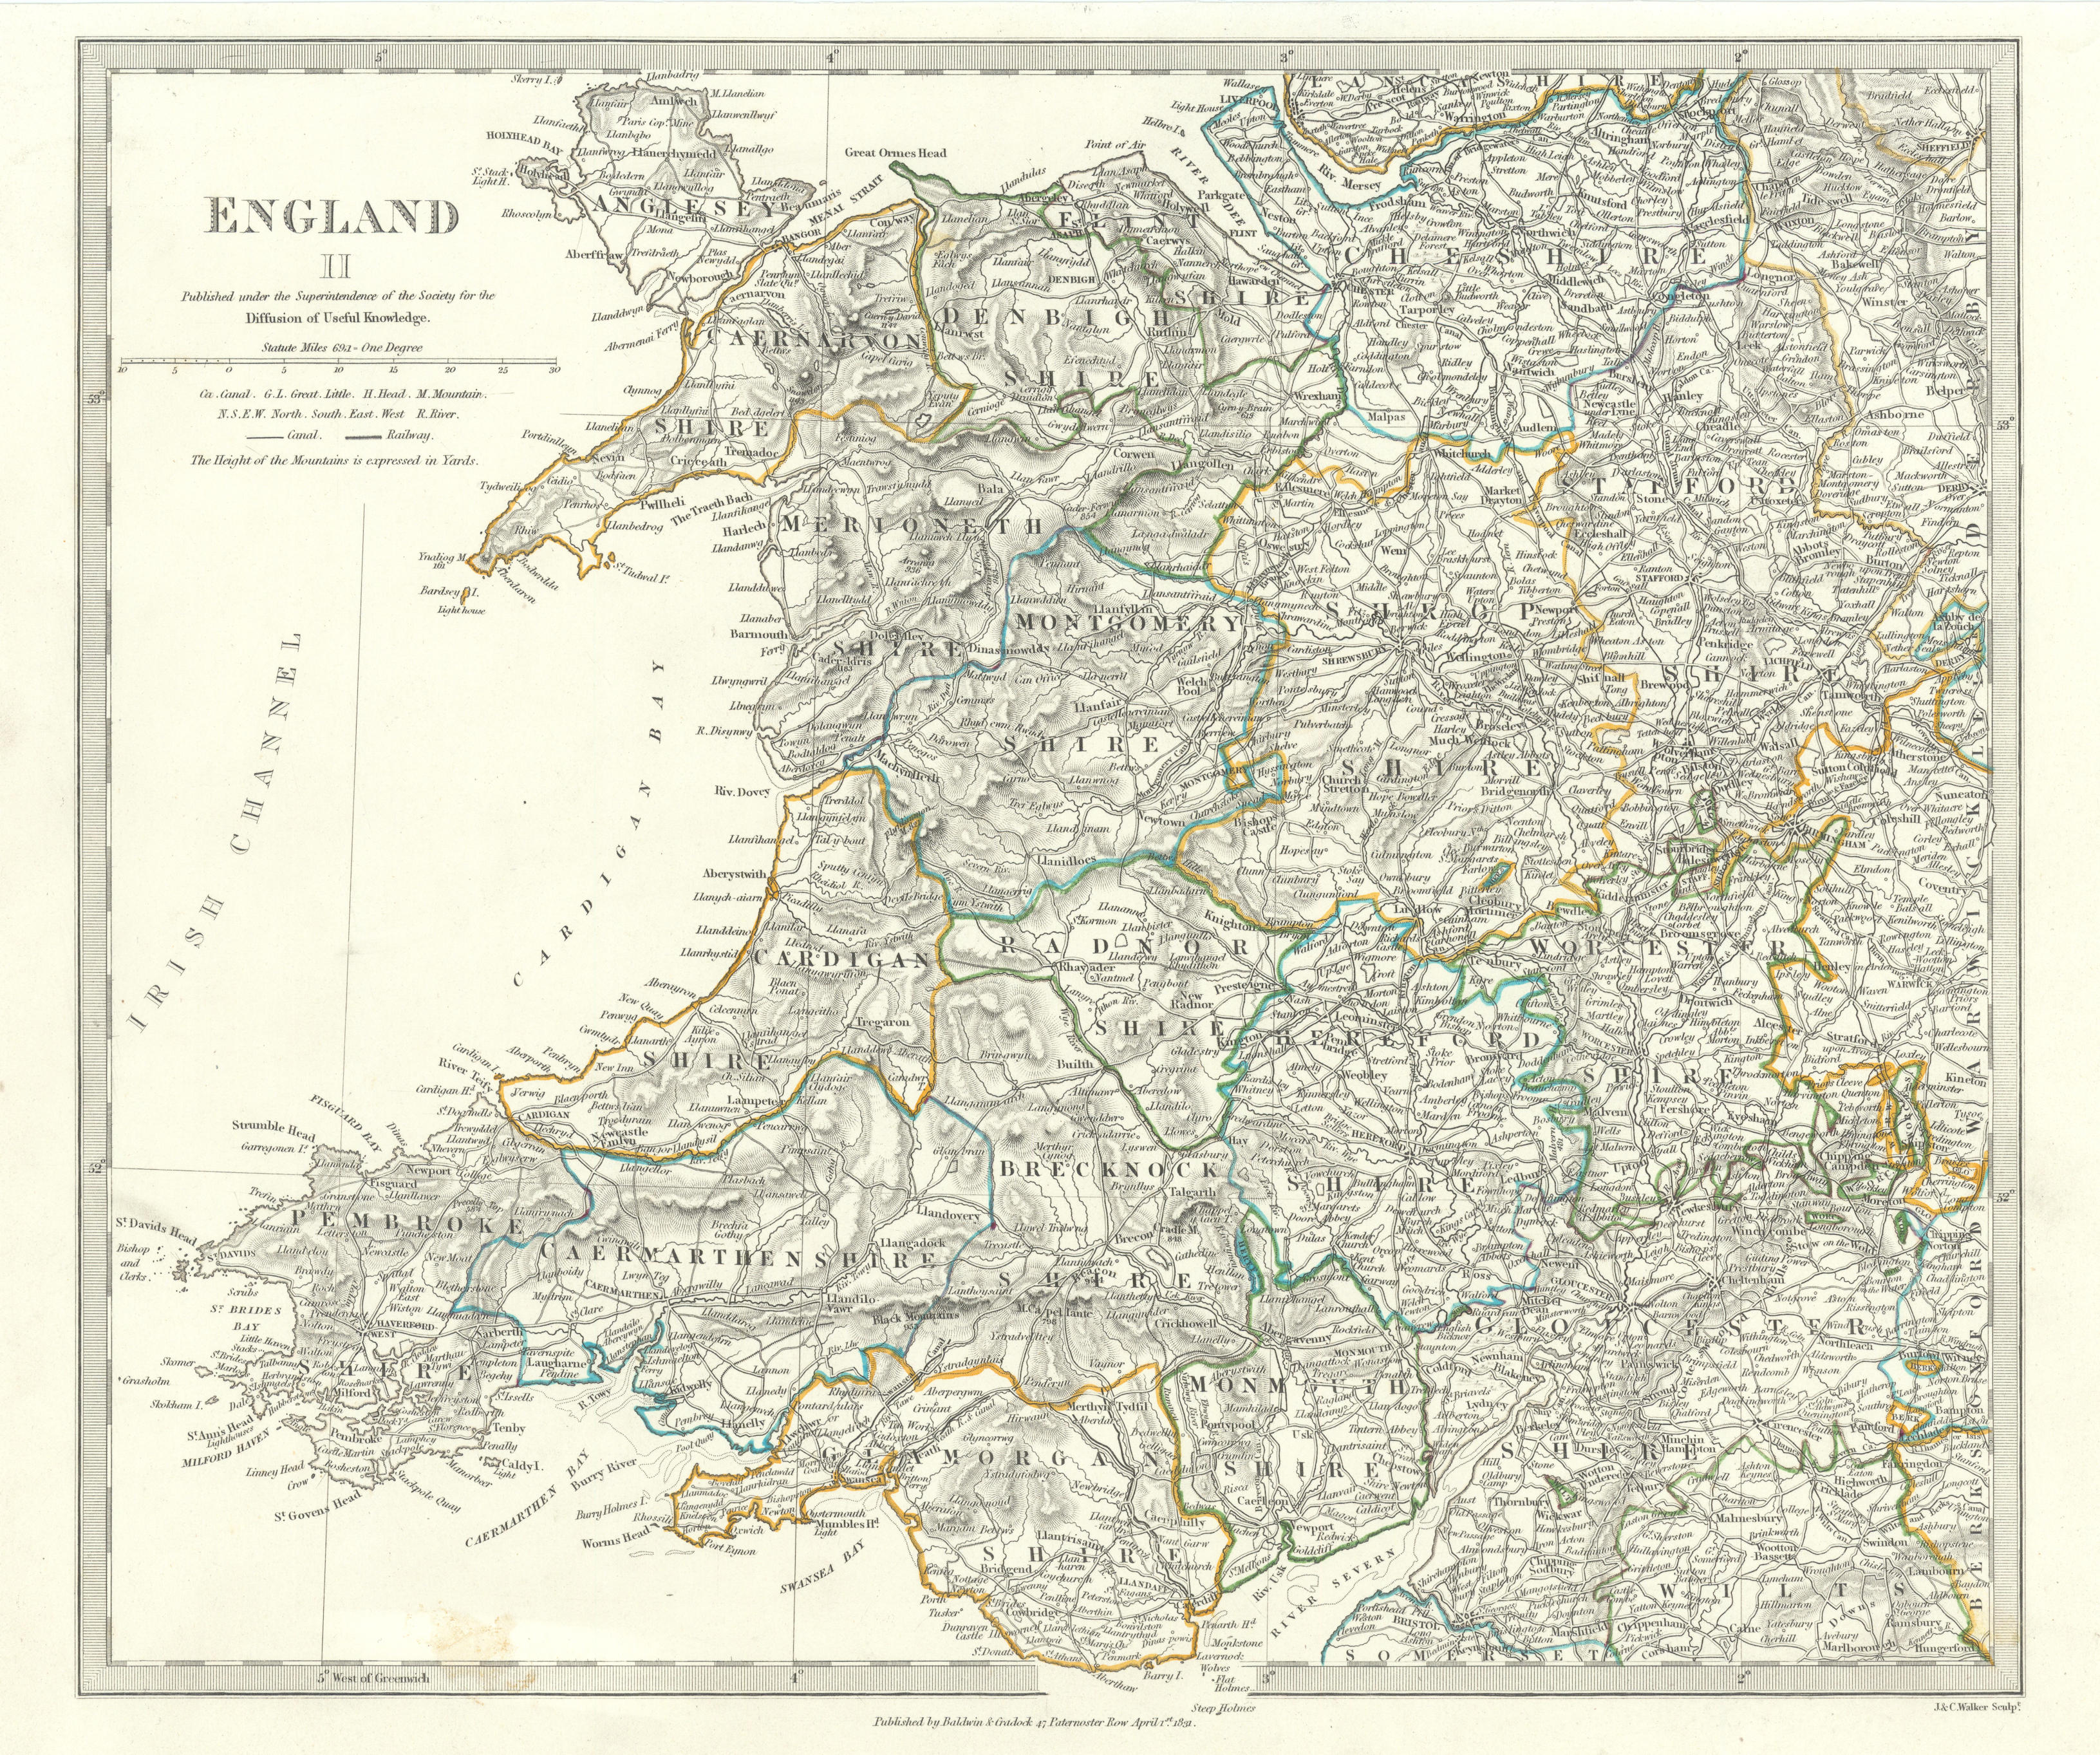 Associate Product WALES & ENGLAND WEST MIDLANDS. Showing counties. Original colour.SDUK 1844 map